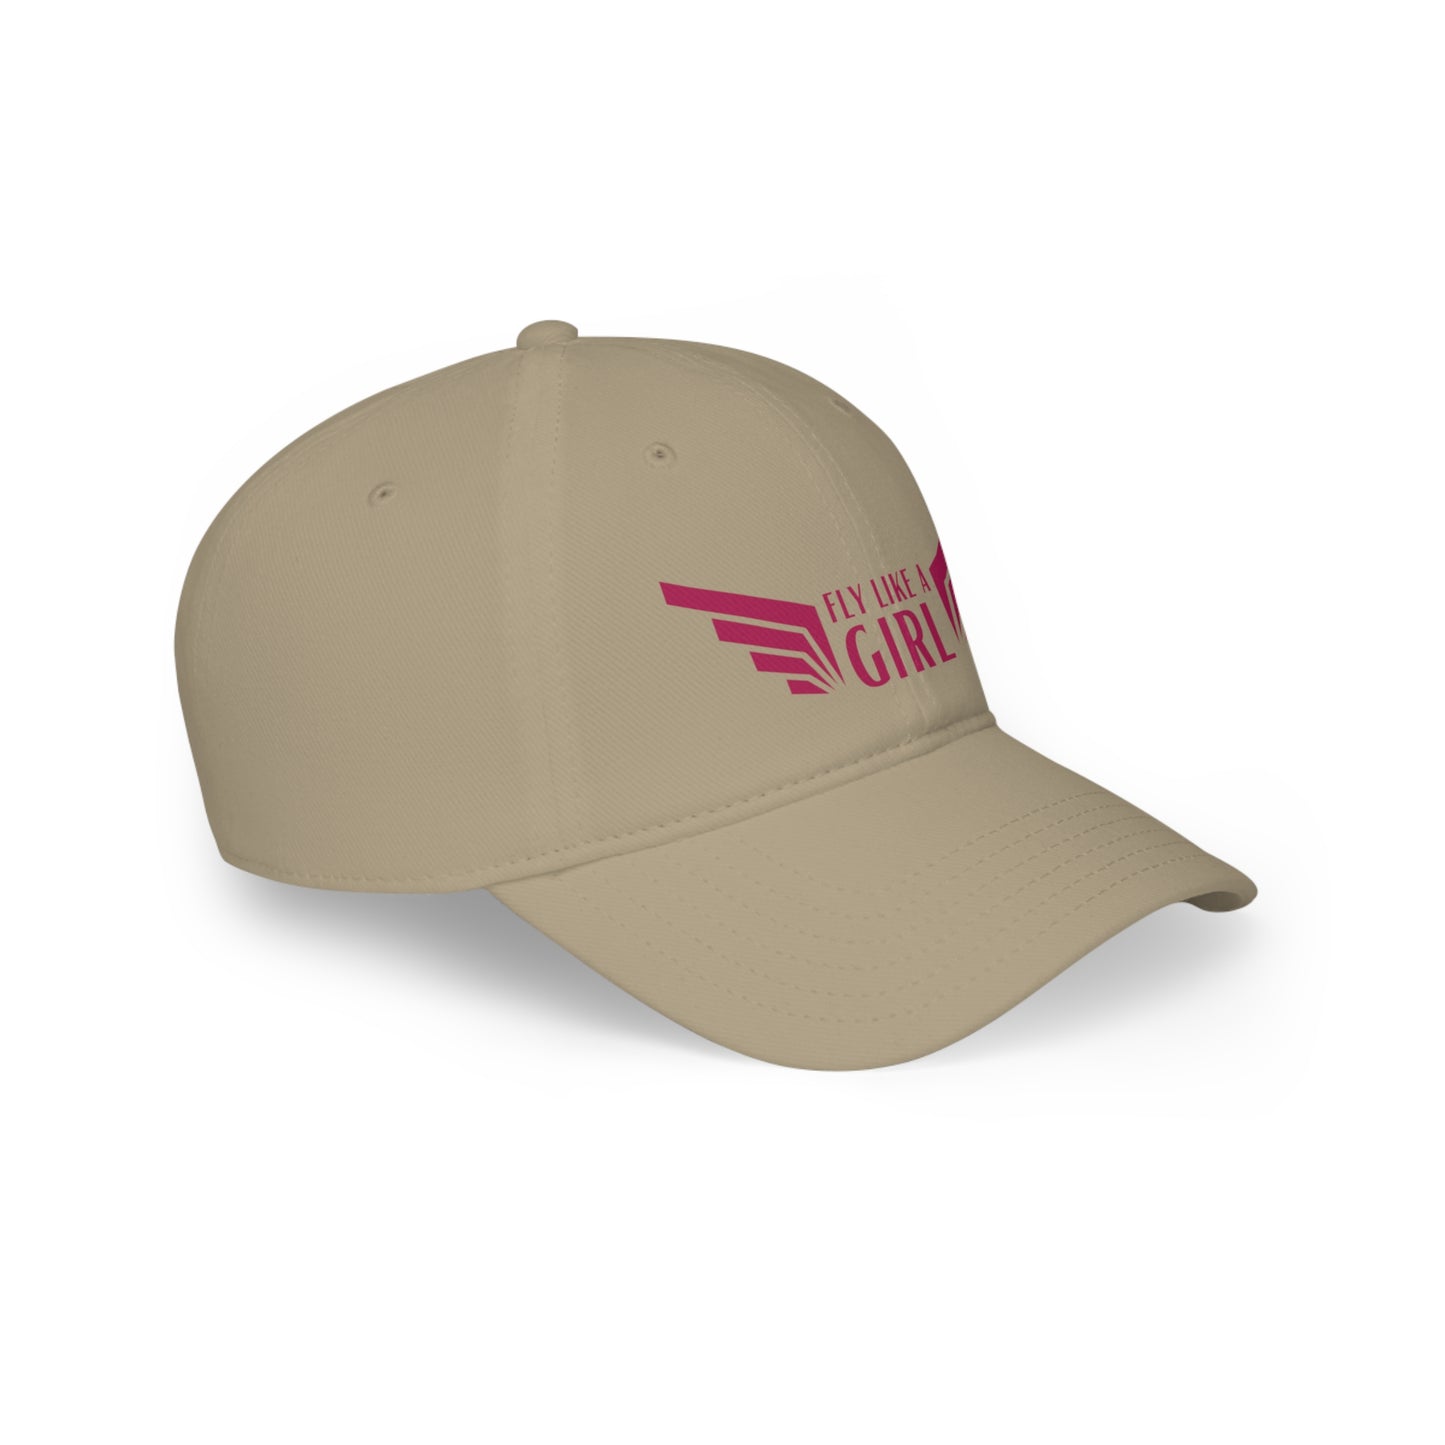 "Fly Like A Girl" Aviation Hat